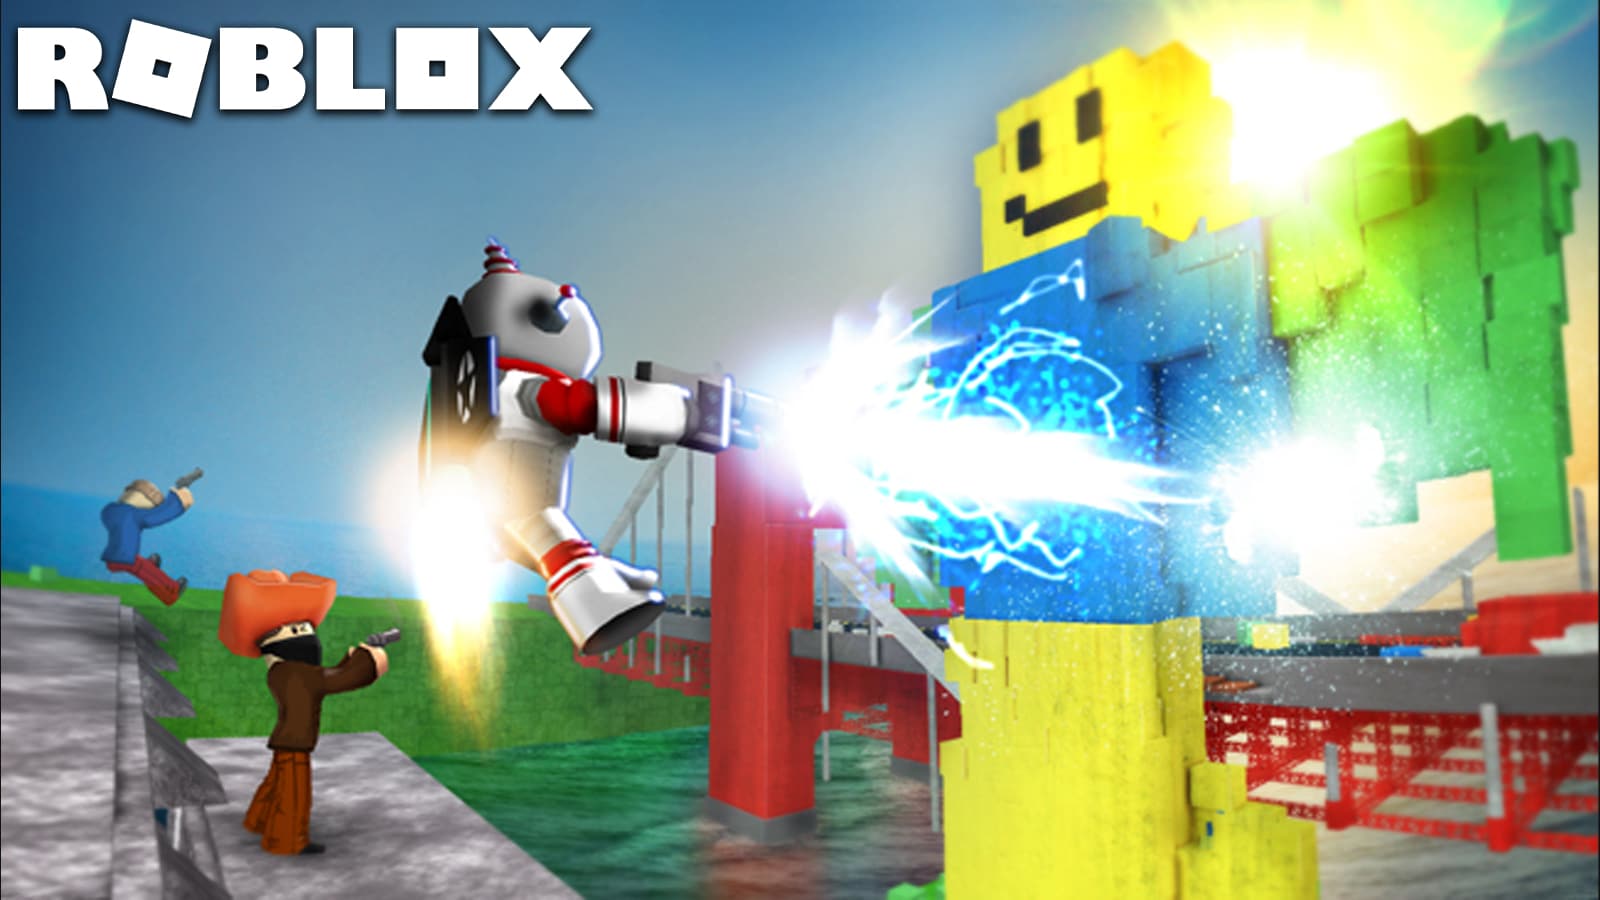 How To Add Roblox Extensions on Mobile [EASY!] 